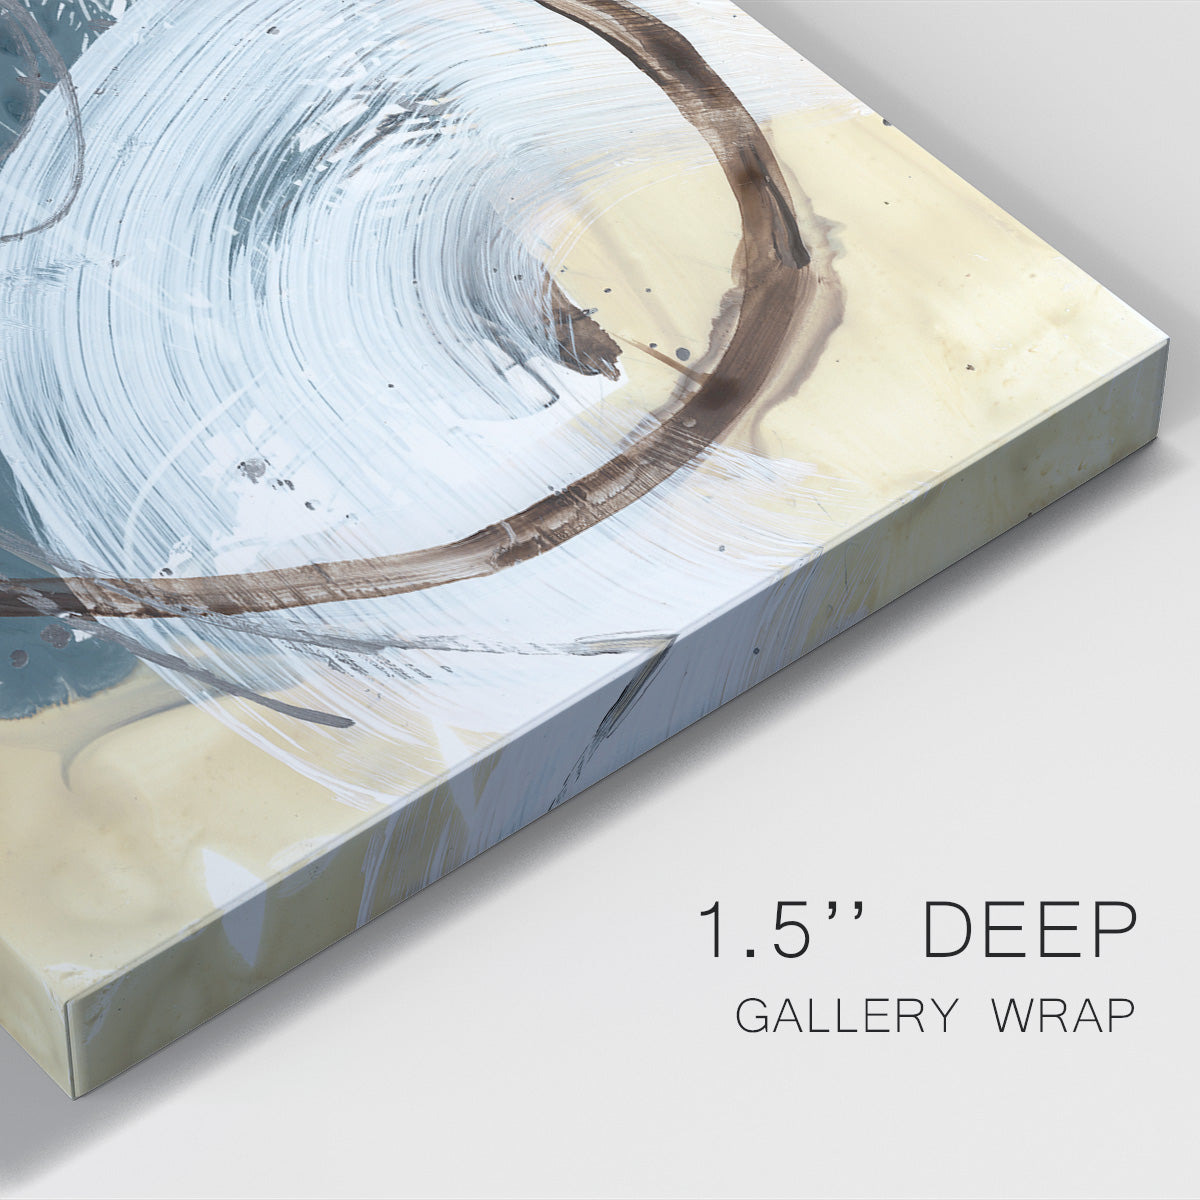 Winding Around I Premium Gallery Wrapped Canvas - Ready to Hang